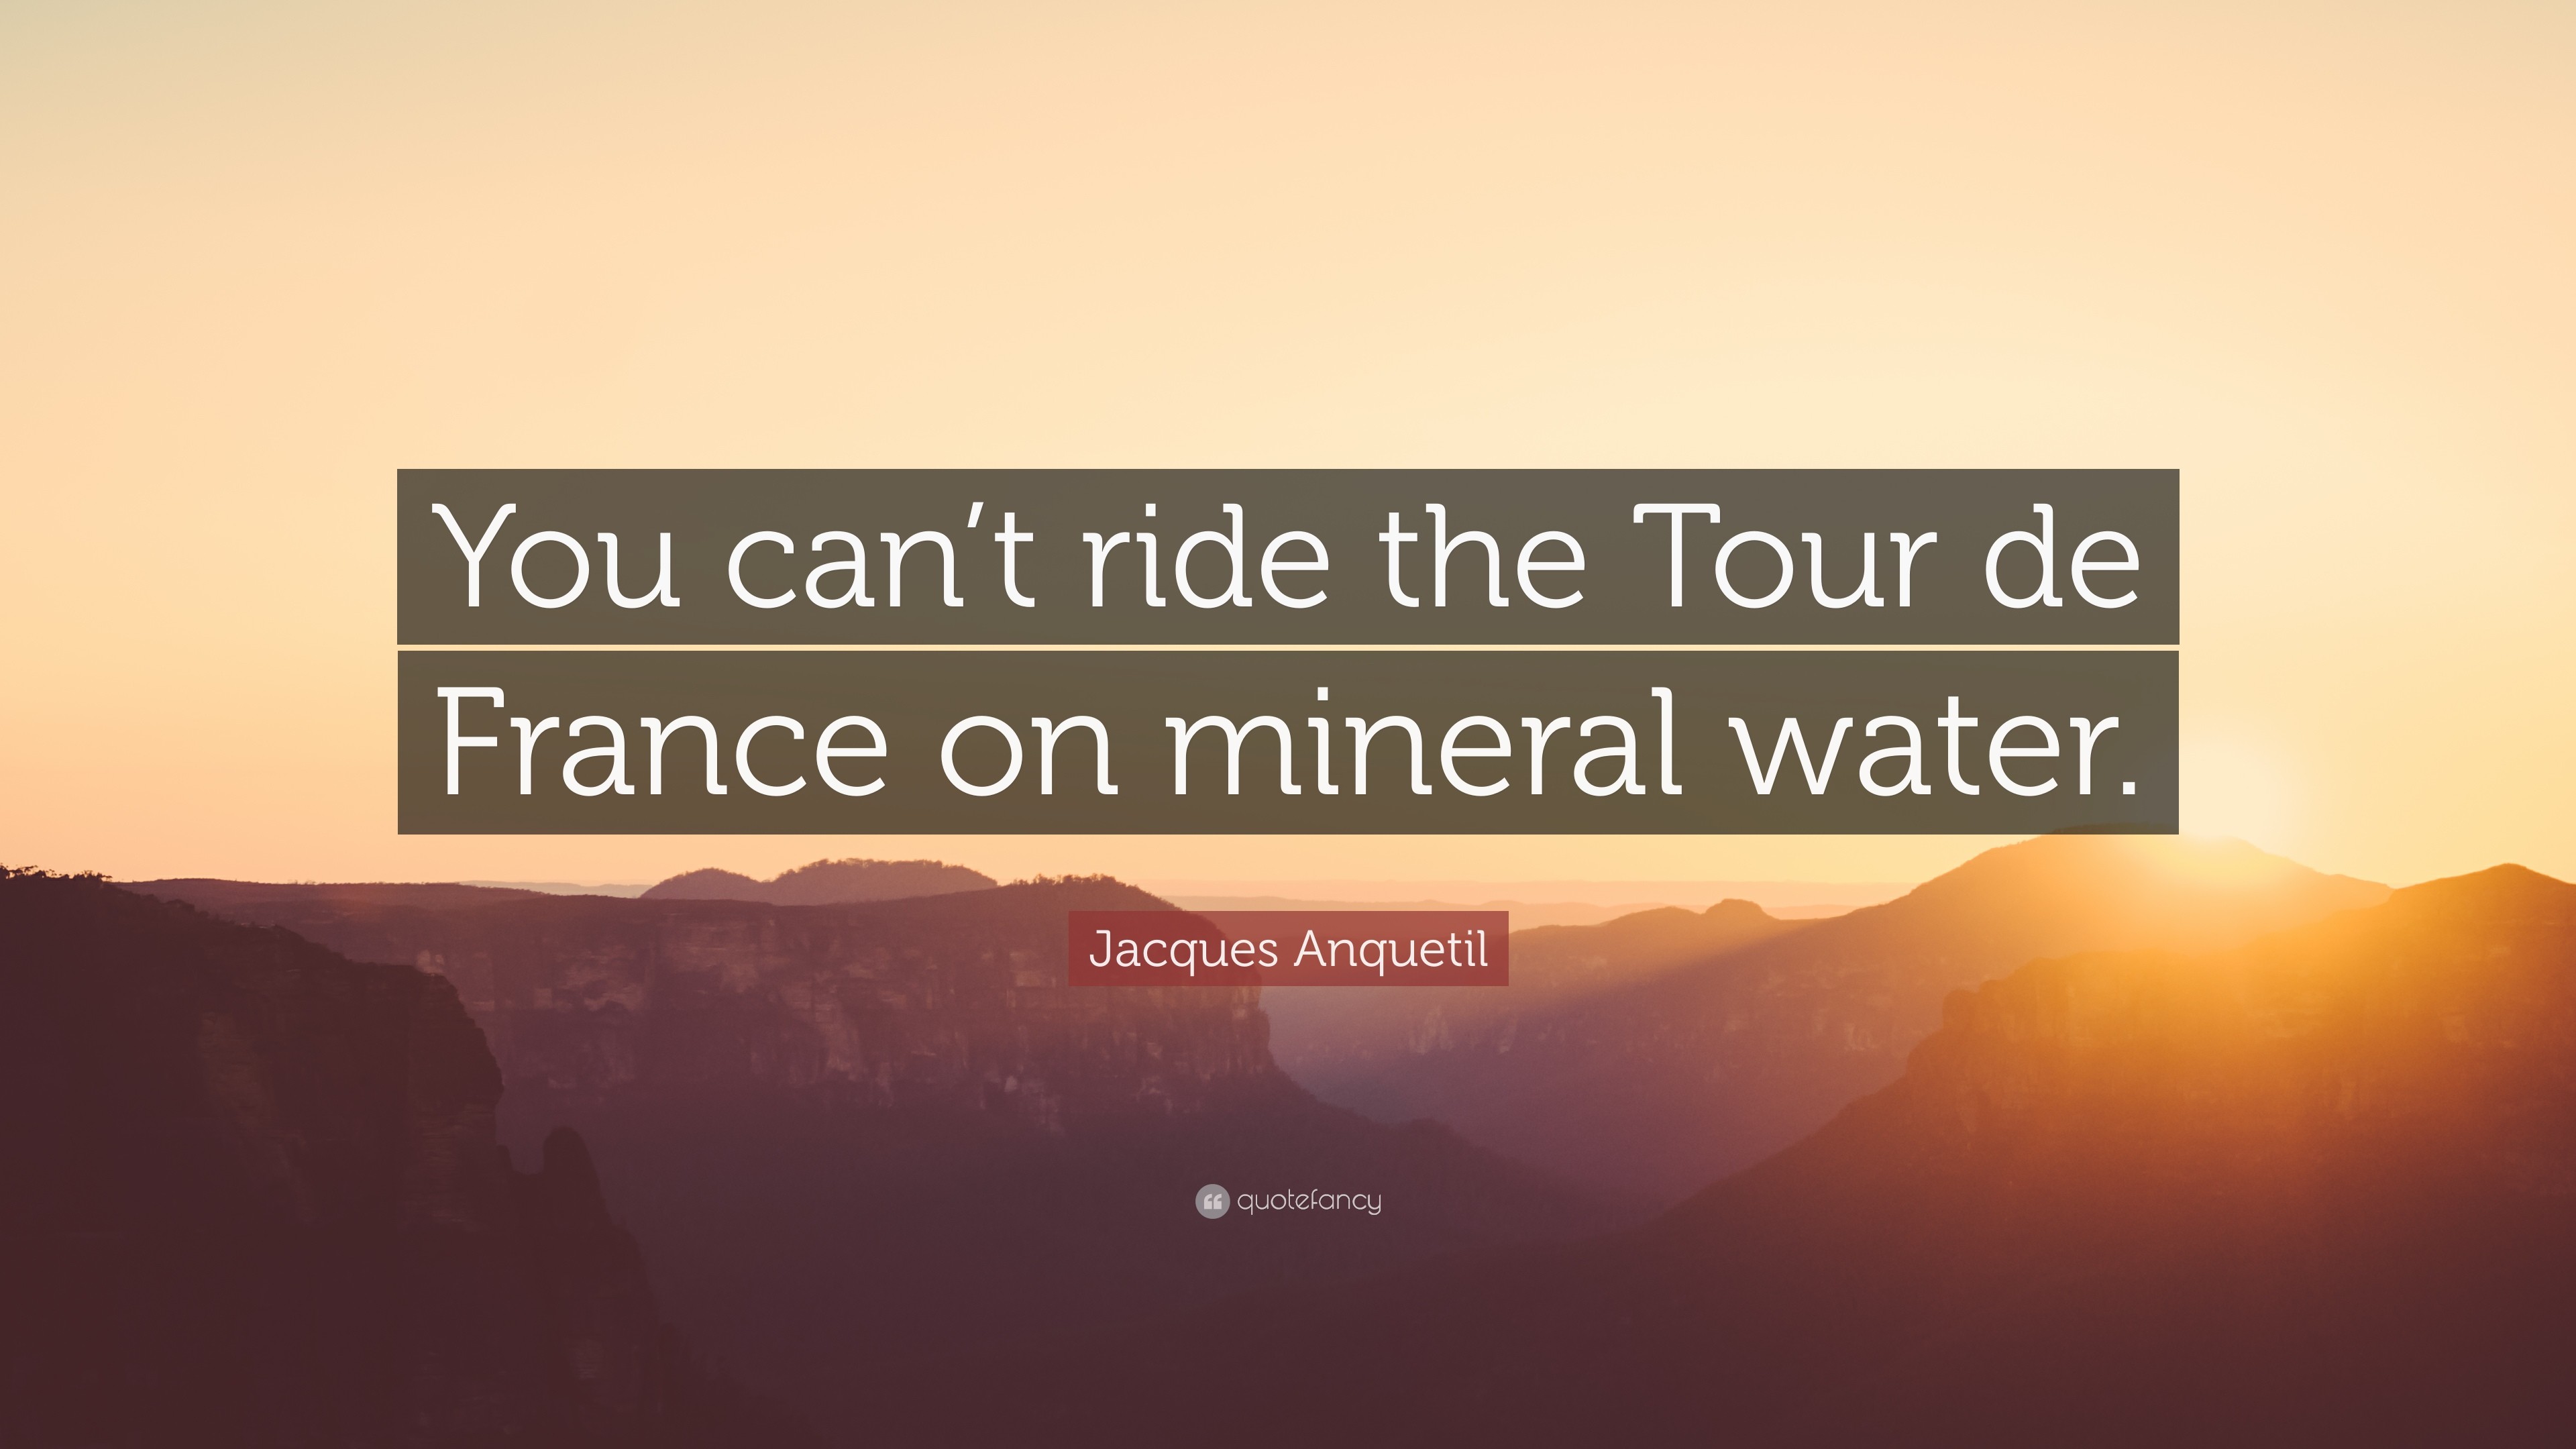 3840x2160 Jacques Anquetil Quote: “You can't ride the Tour de France on mineral